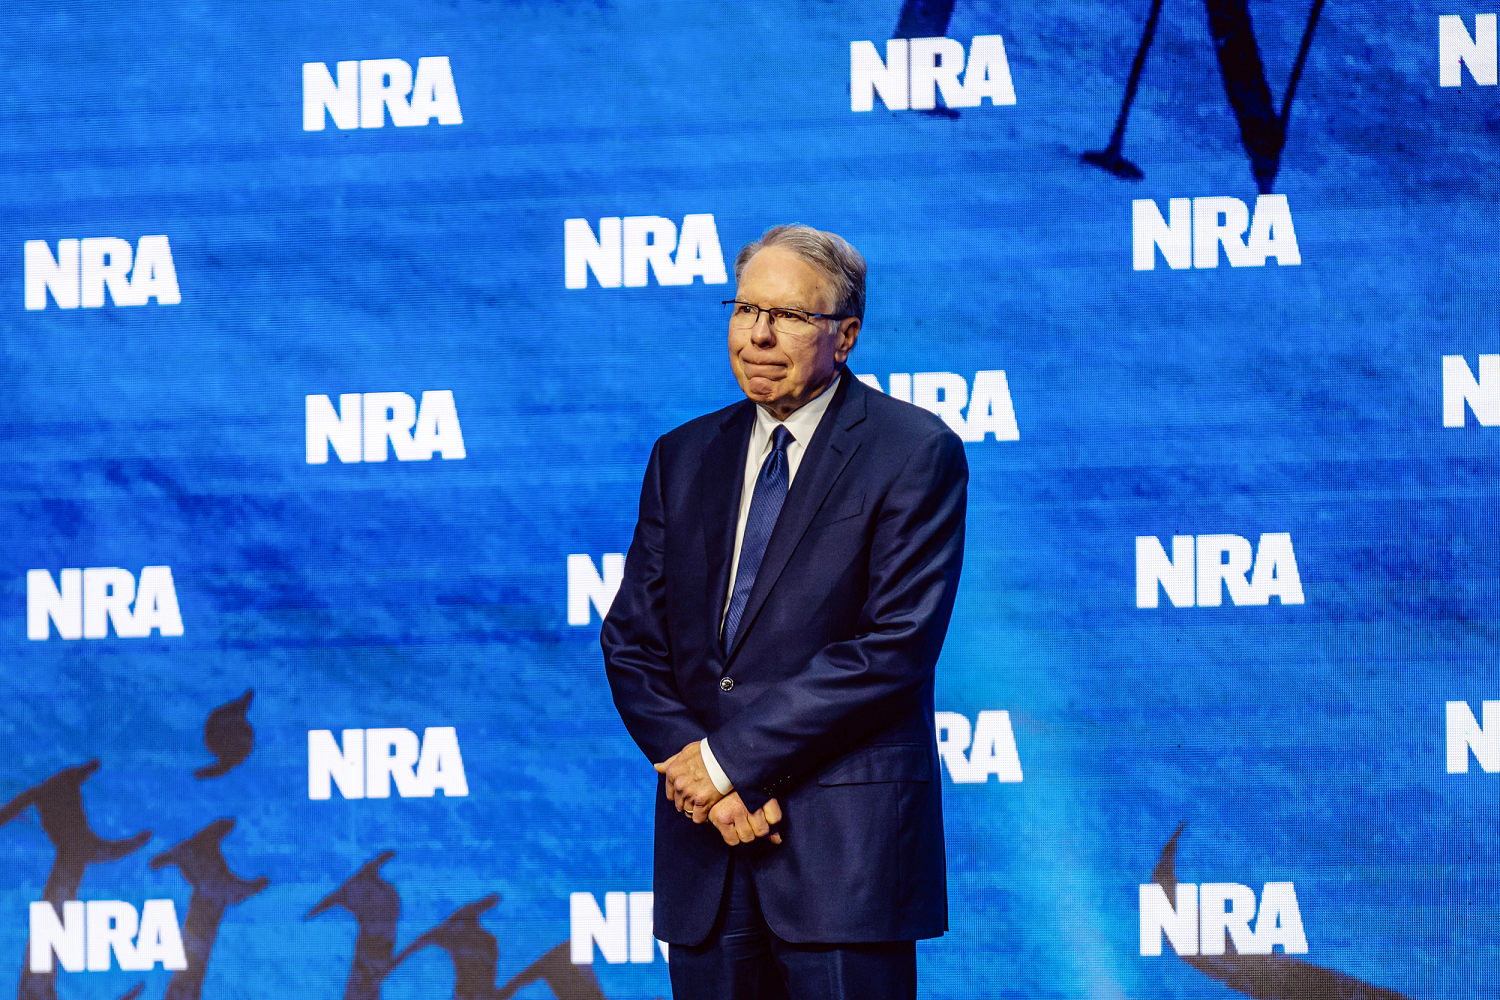 NRA civil trial threatens to shake up gun rights organization even with leader’s resignation